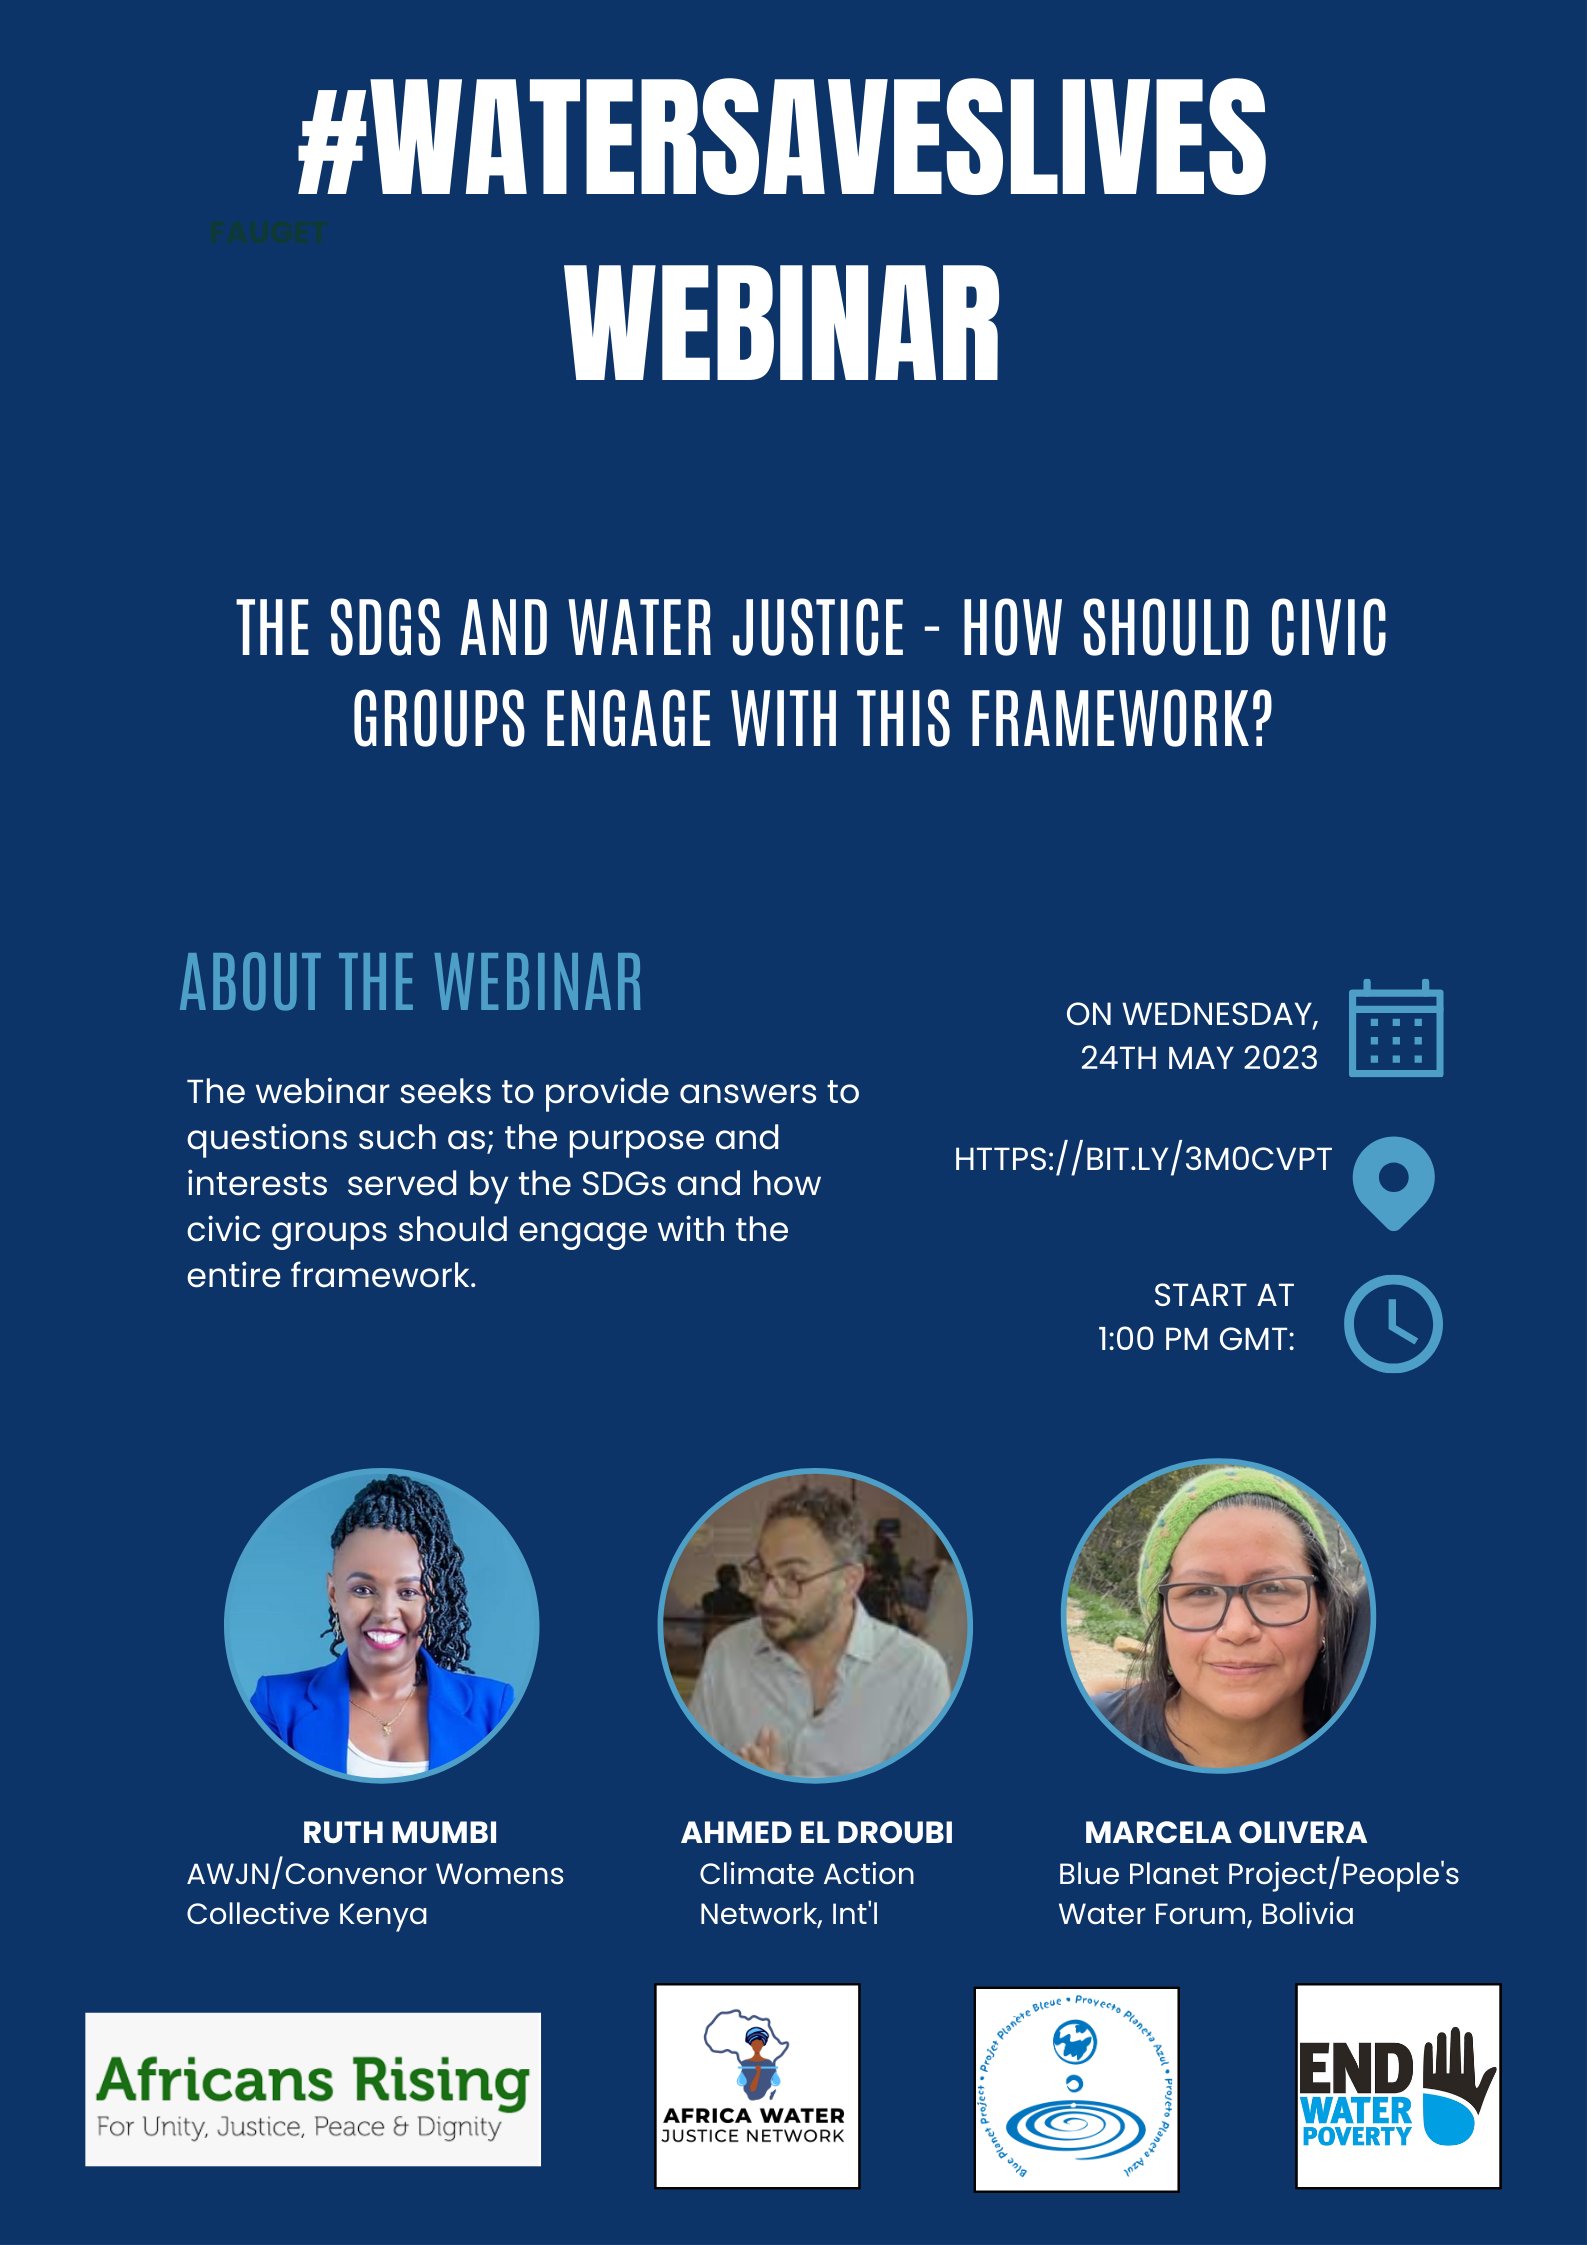 The SDGs and Water Justice – How Should Civic Groups Engage With This Framework?